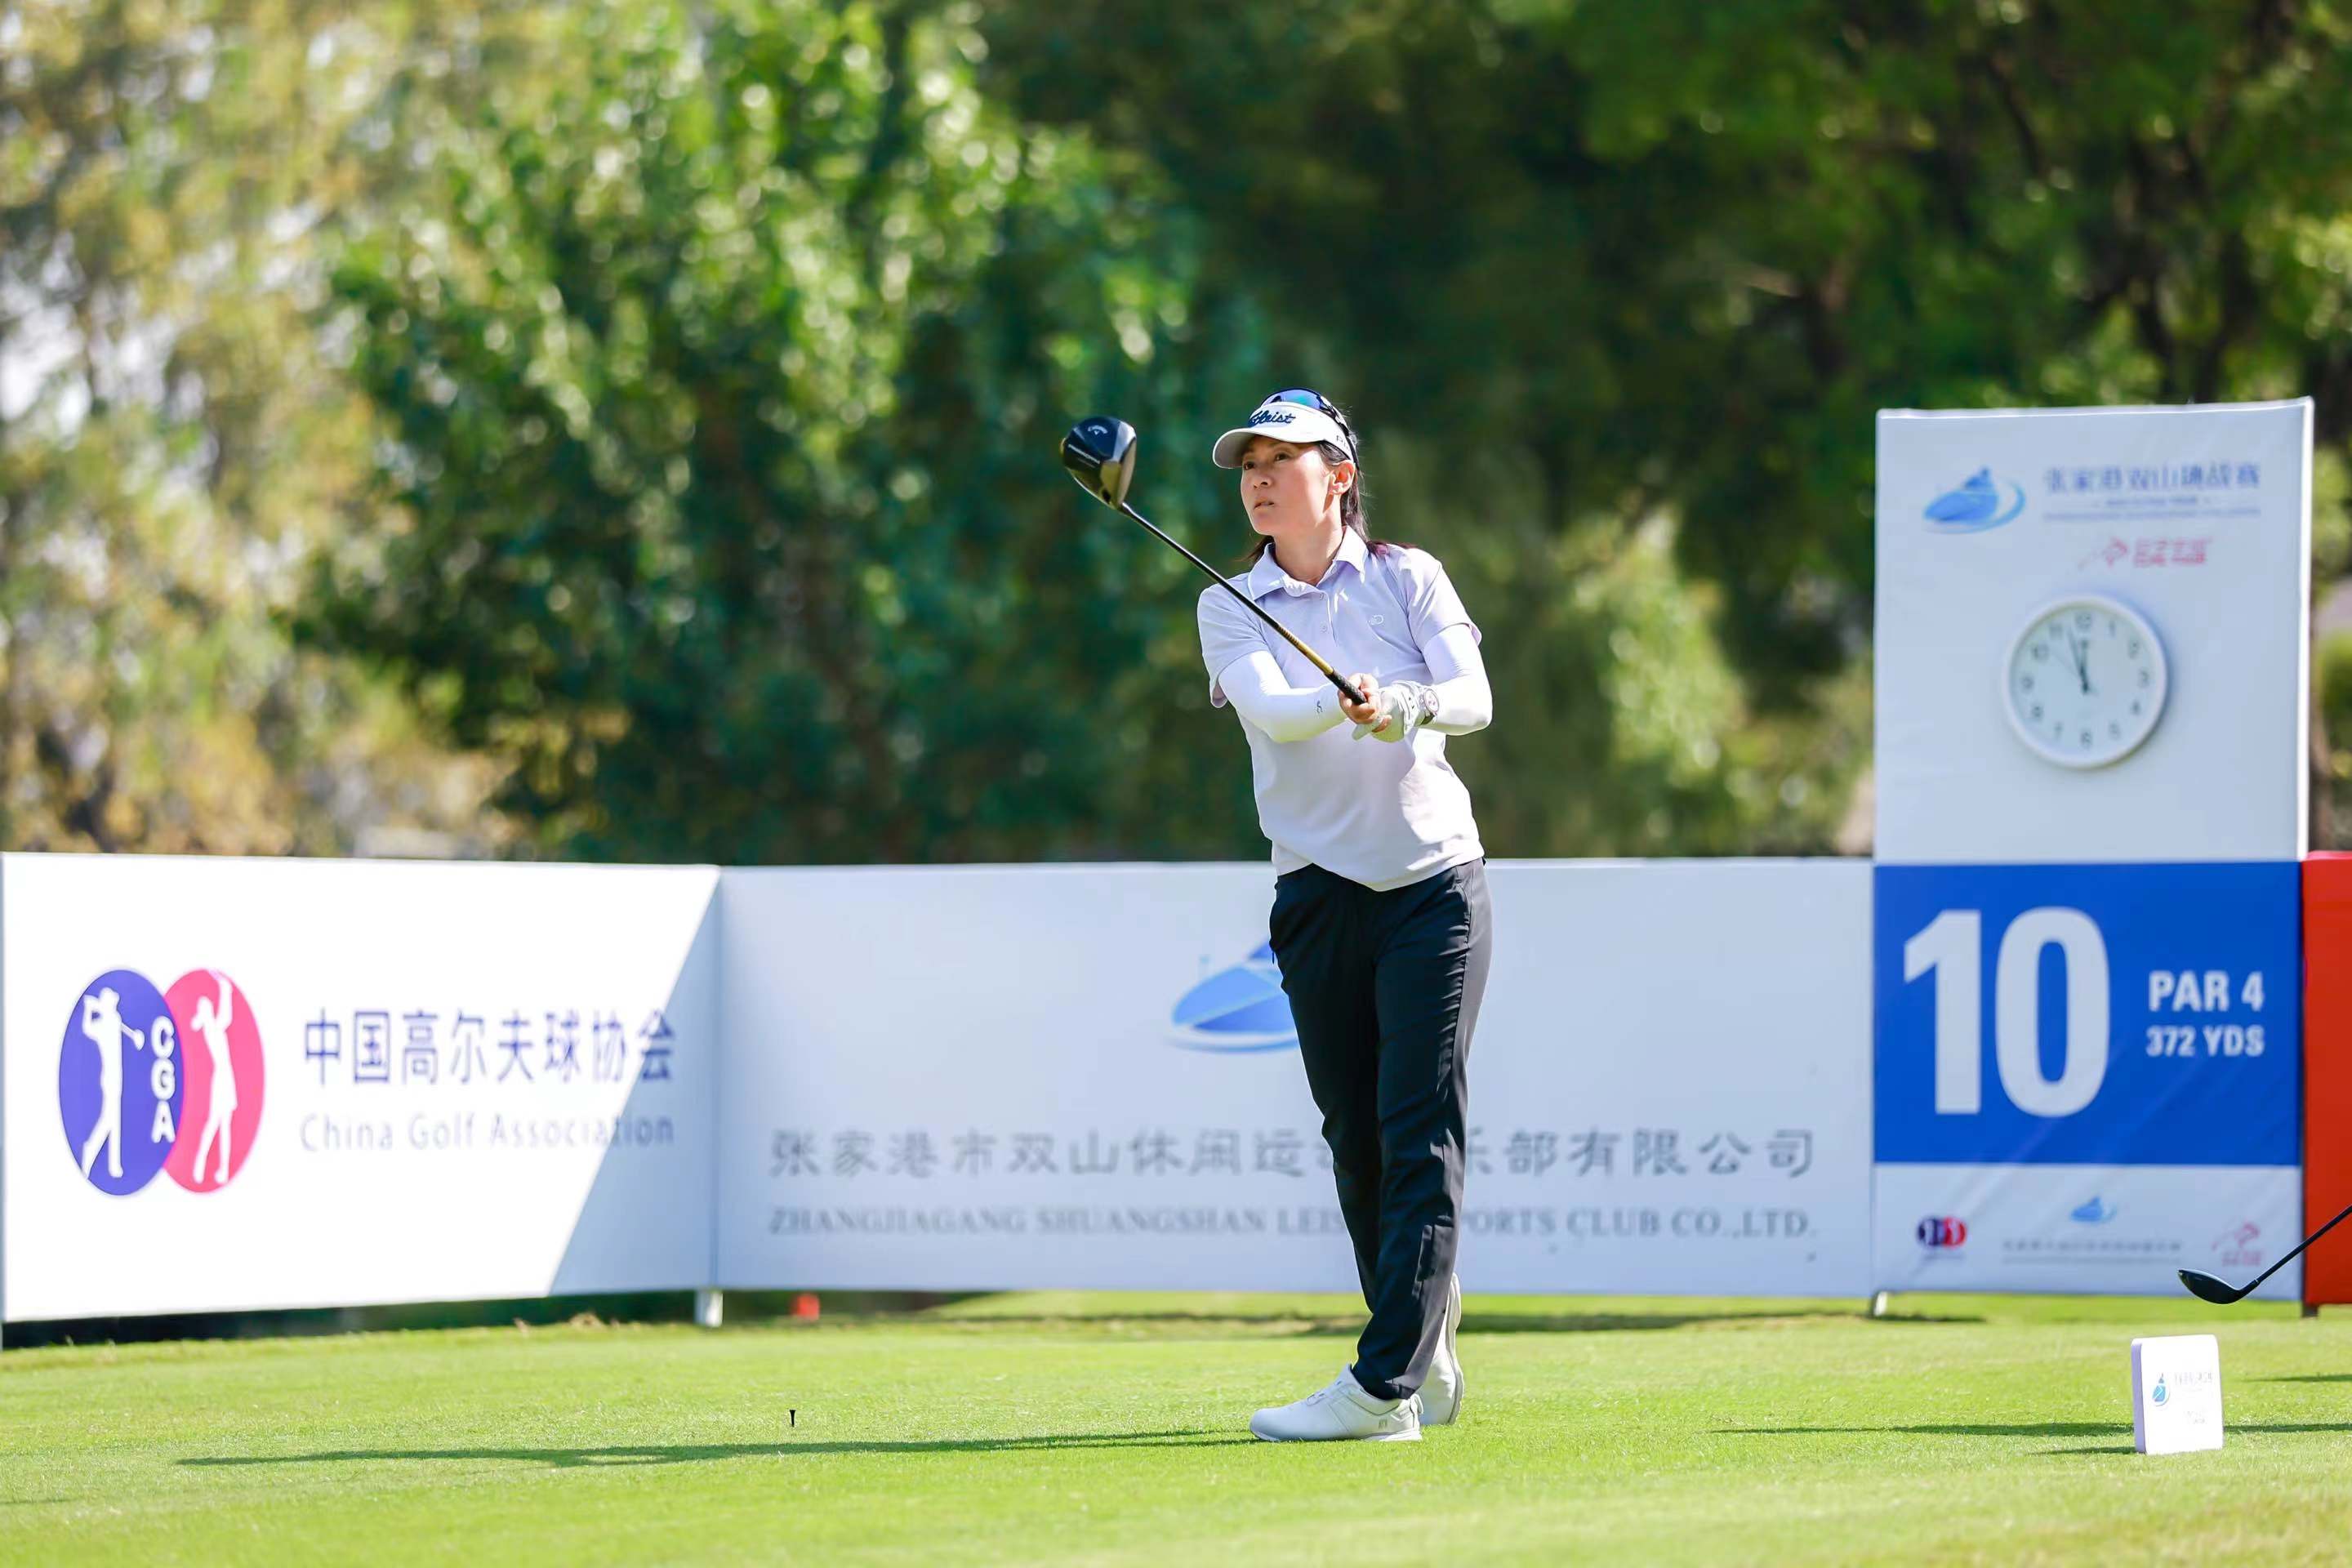 Golfer Tan delivers with maiden win in East China’s Jiangsu